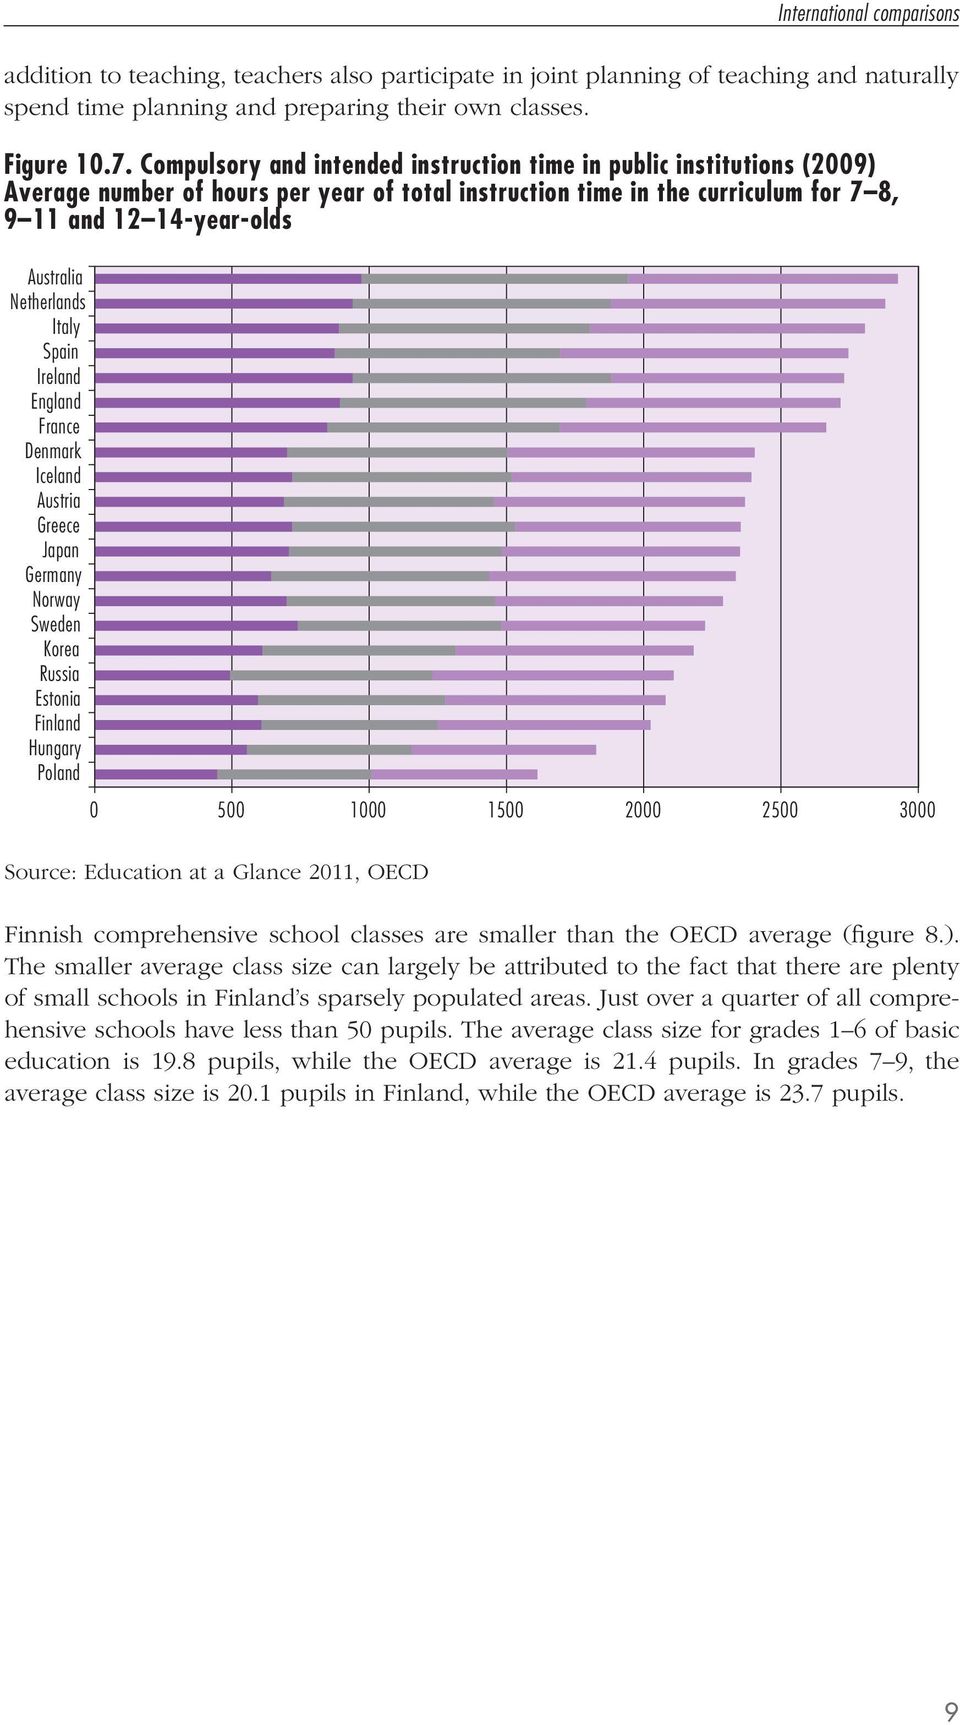 Greece Japan Russia International comparisons 0 500 1000 1500 2000 2500 3000 Finnish comprehensive school classes are smaller than the OECD average (figure 8.).